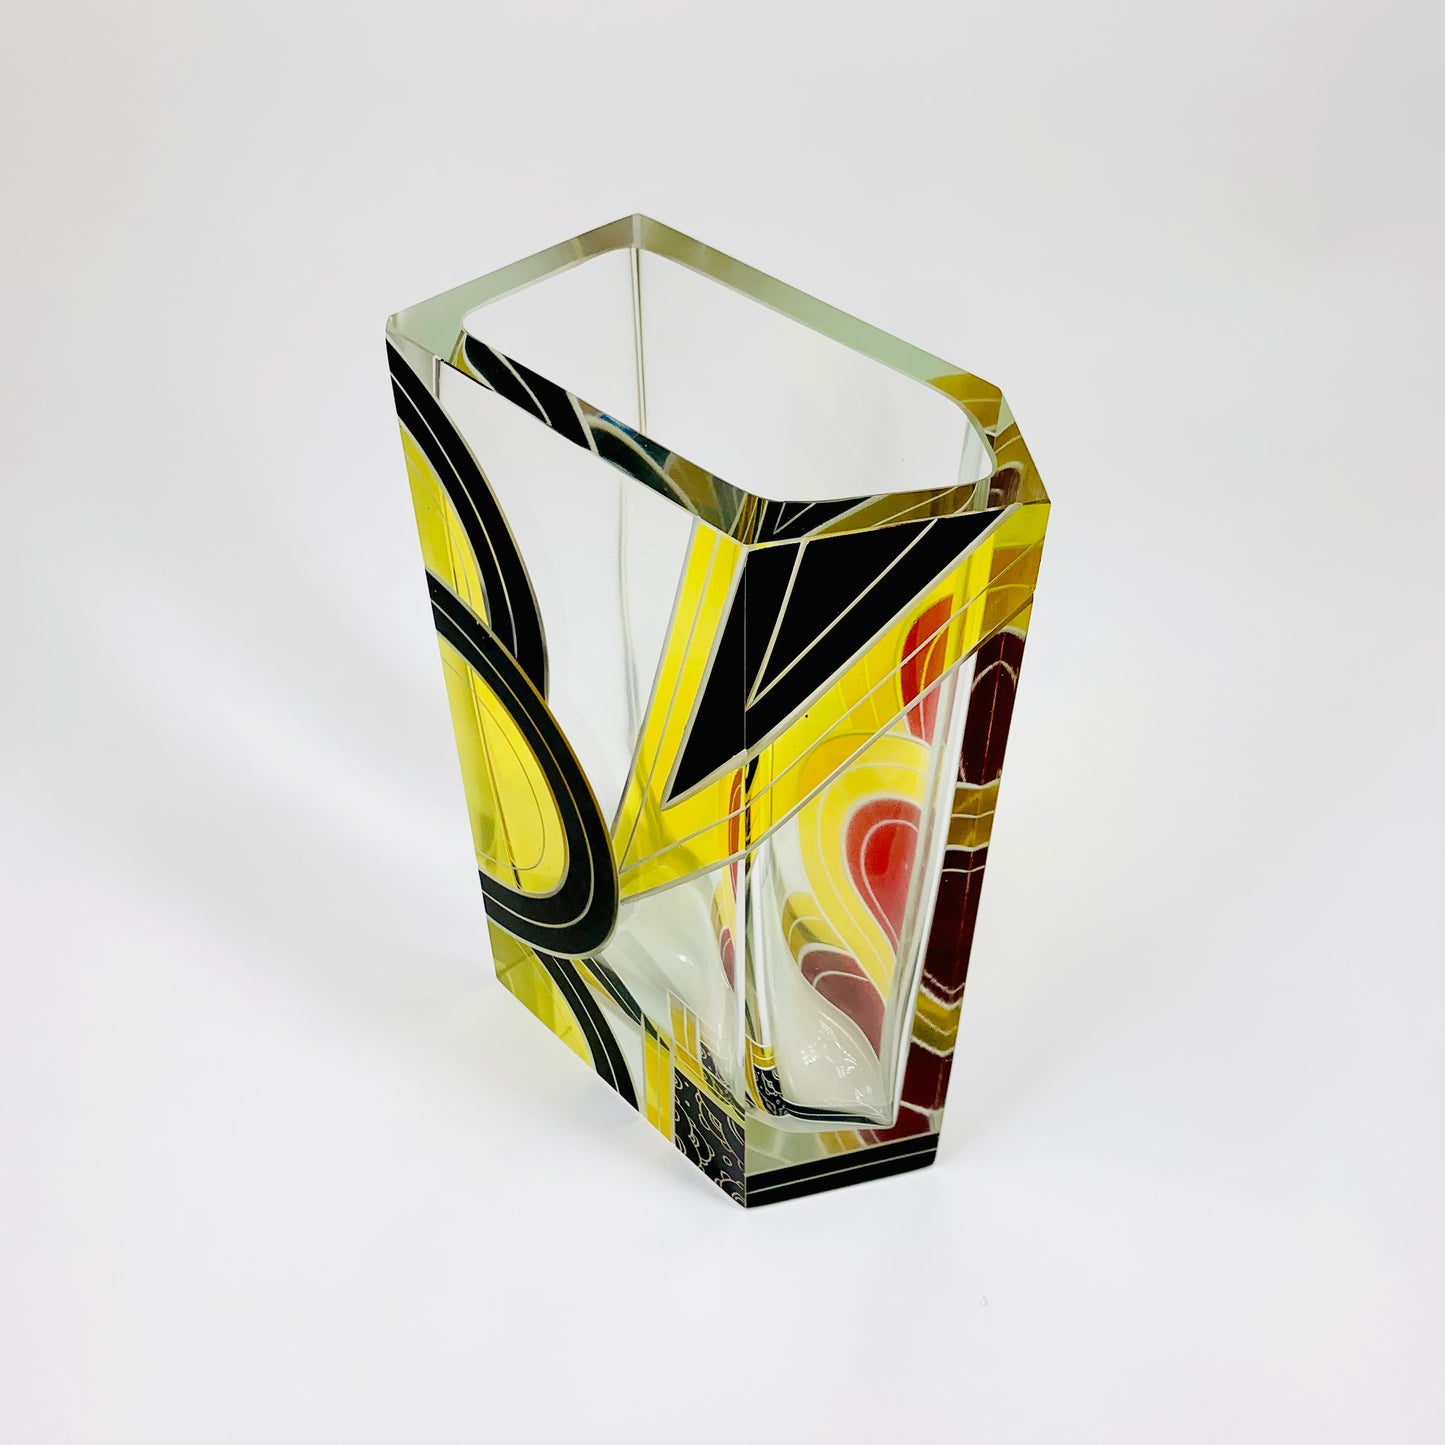 Extremely rare antique Art Deco black, red and yellow enamel glass vase by Karl Palda